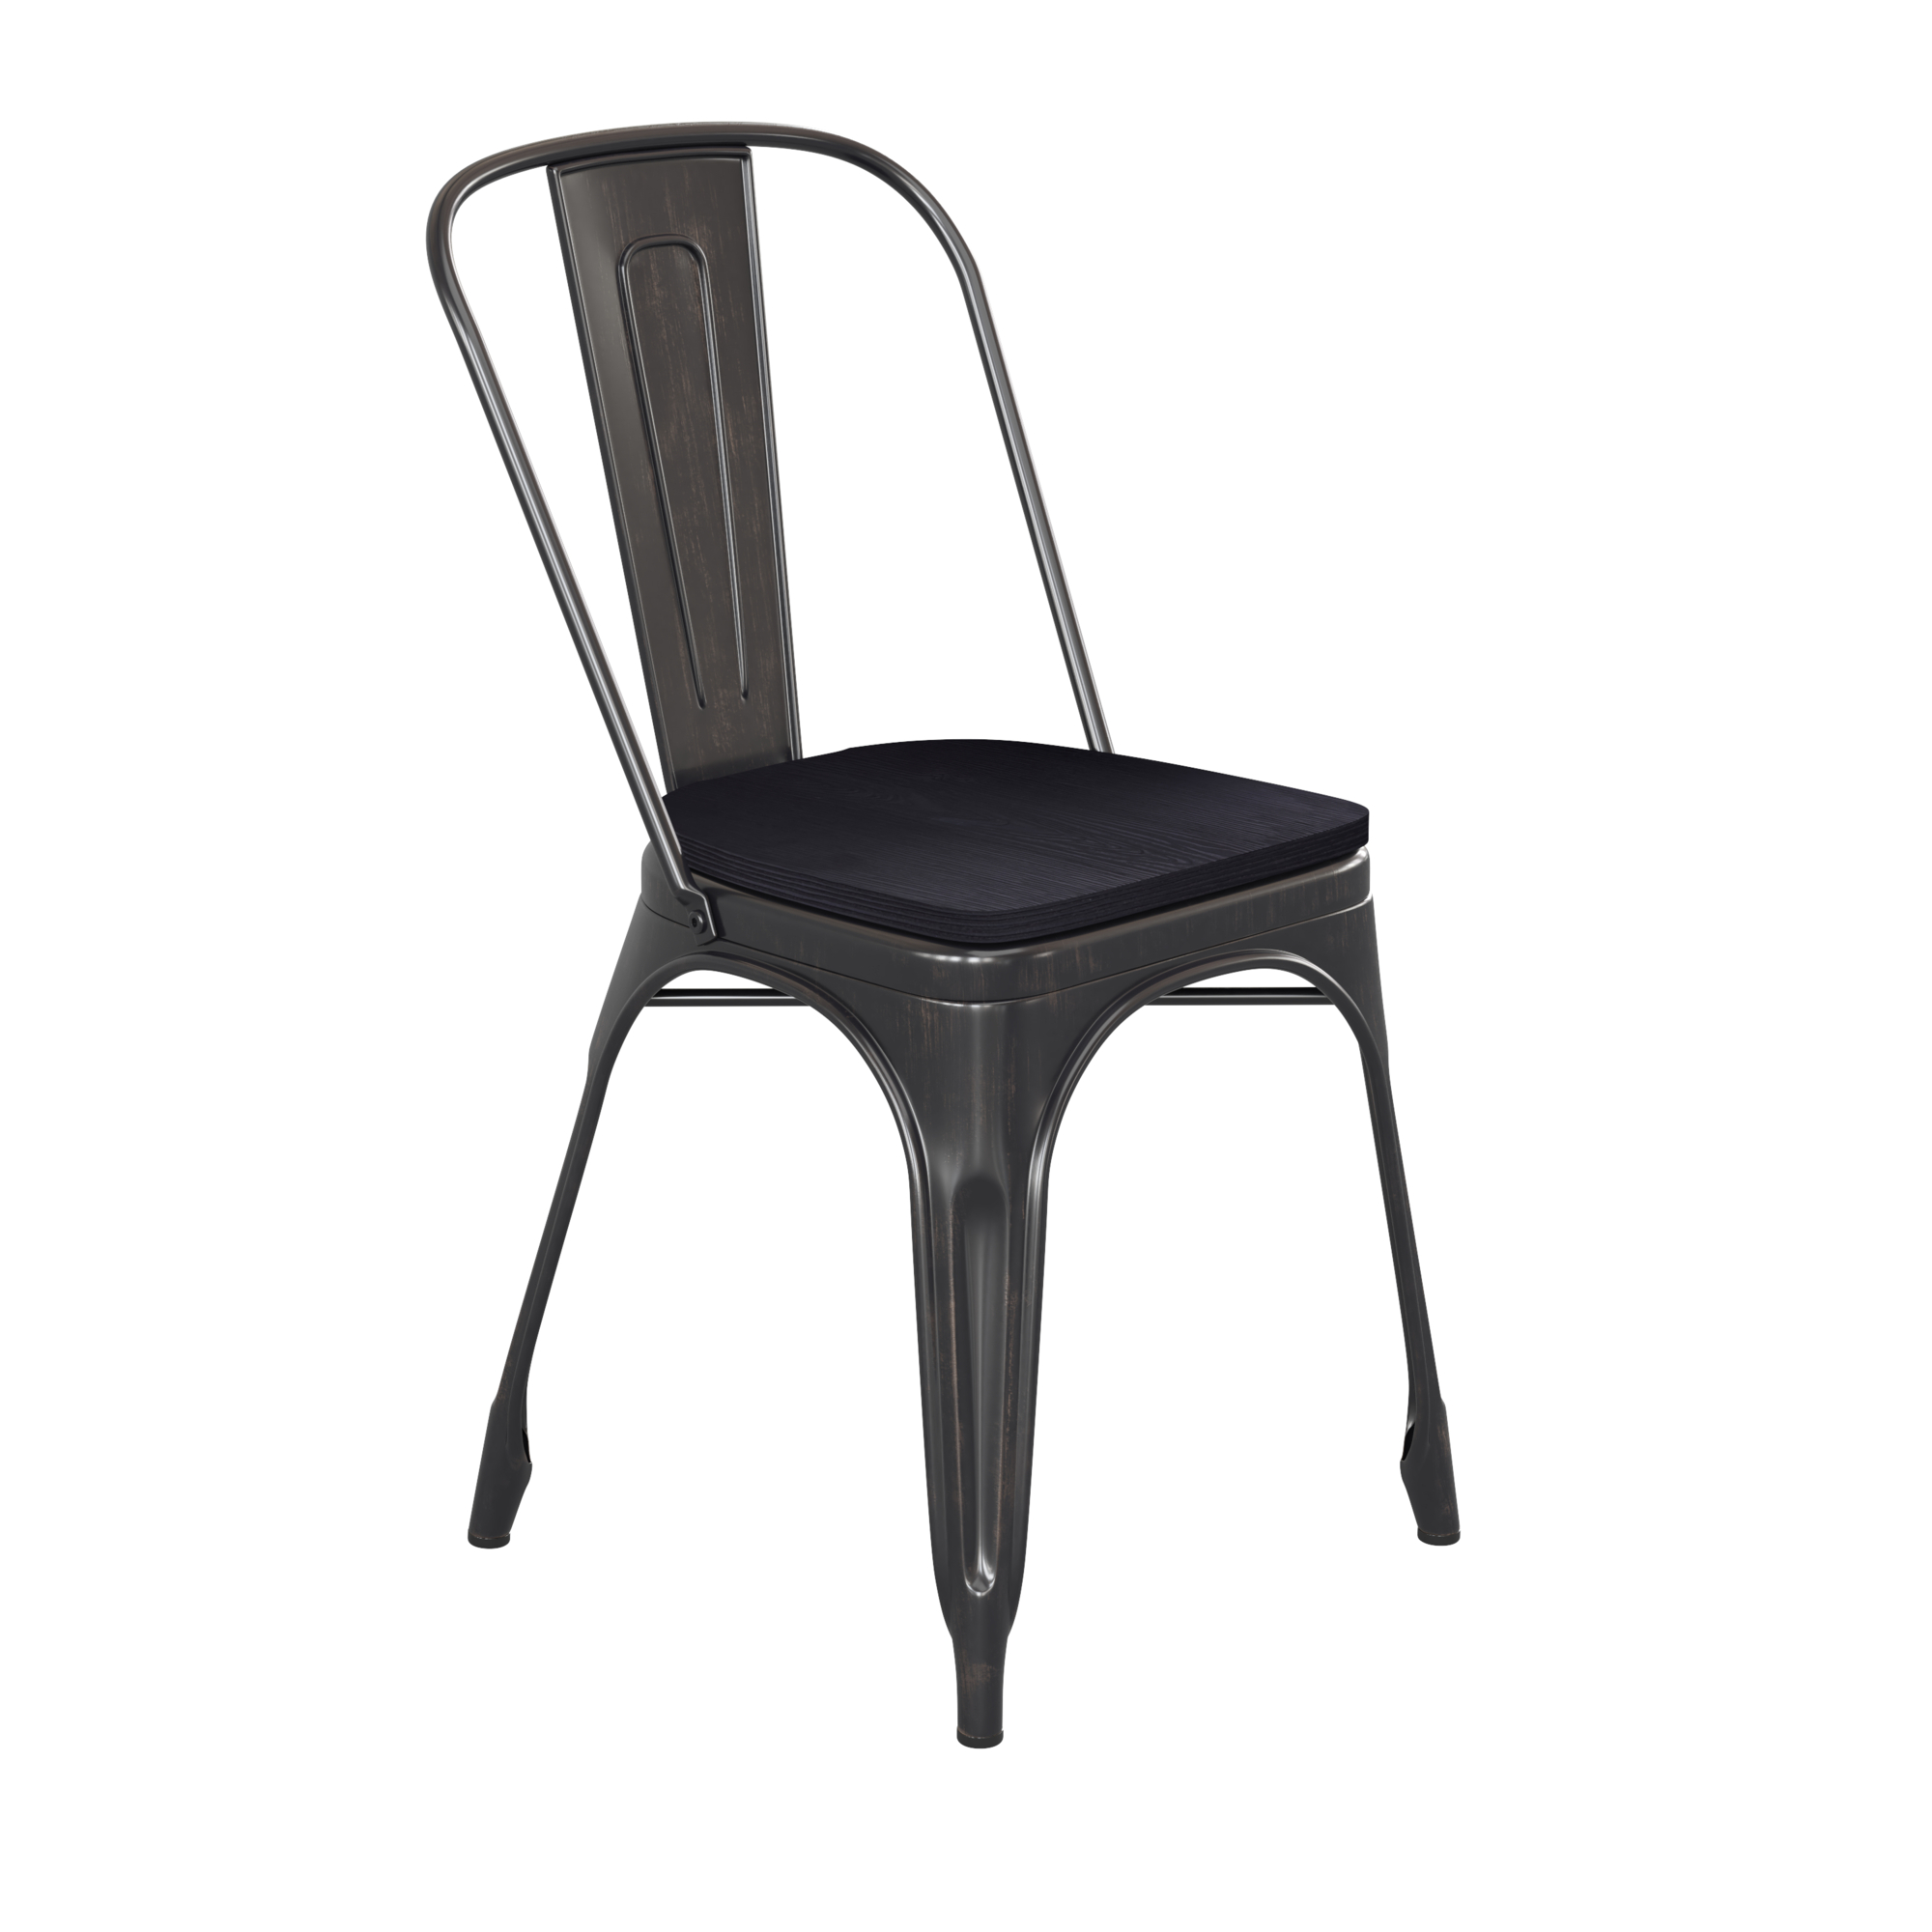 Flash Furniture, Aged Black Metal Stack Chair-Black Poly Resin Seat, Primary Color Black, Included (qty.) 1, Model CH31230BQPL1B